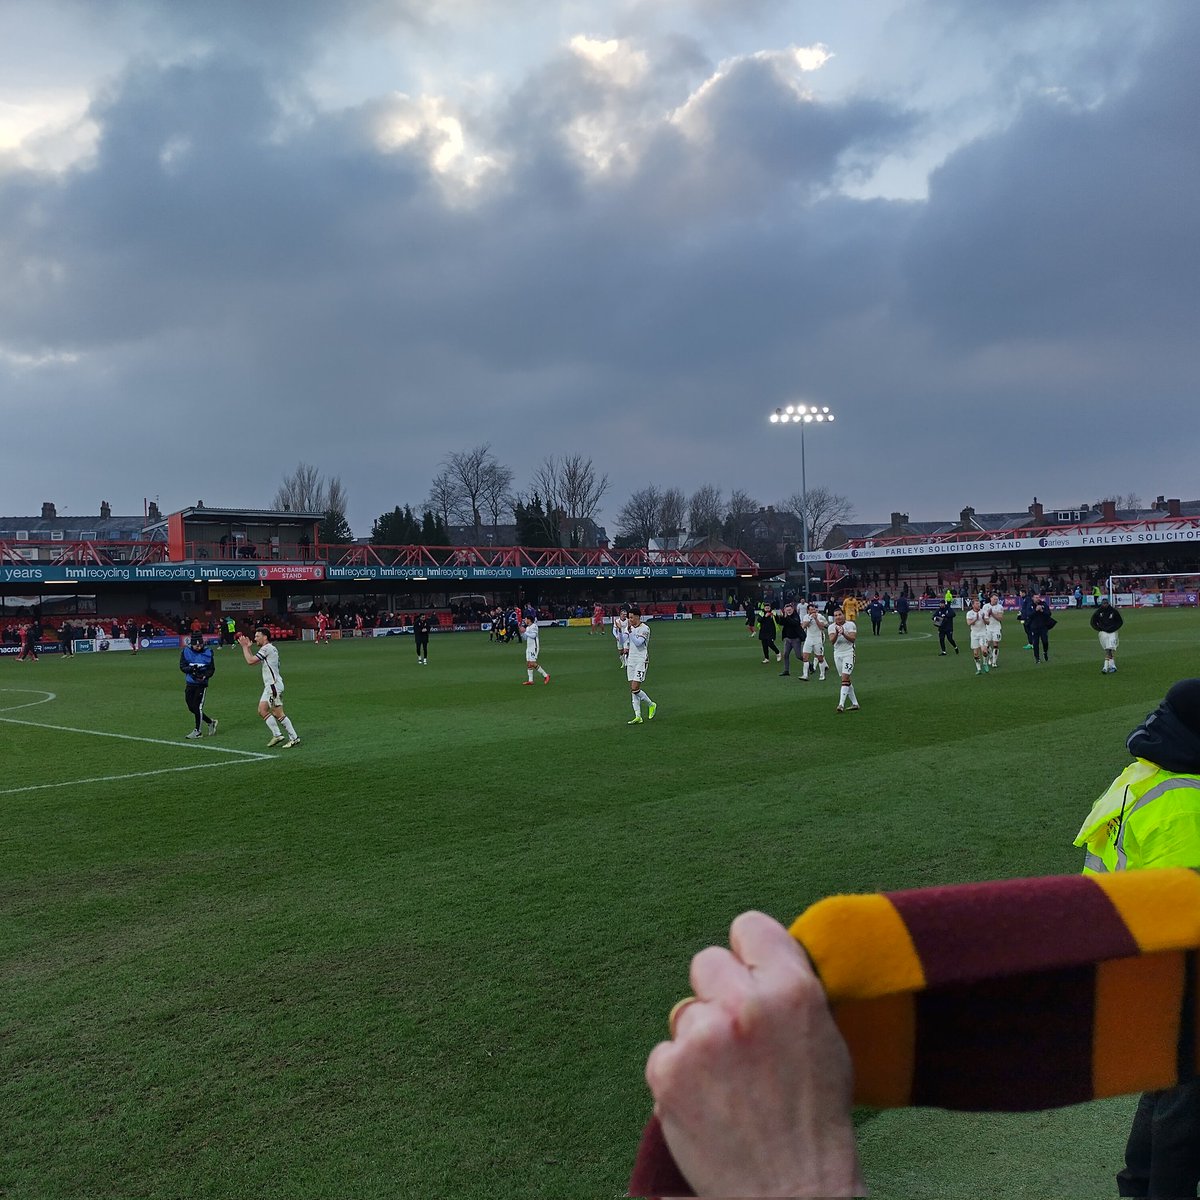 Shortest trip of the season, dominated throughout, full credit to GA and all the players who were on it from the outset, curry and beers to celebrate, thanks to Kav for the photo #bcafc